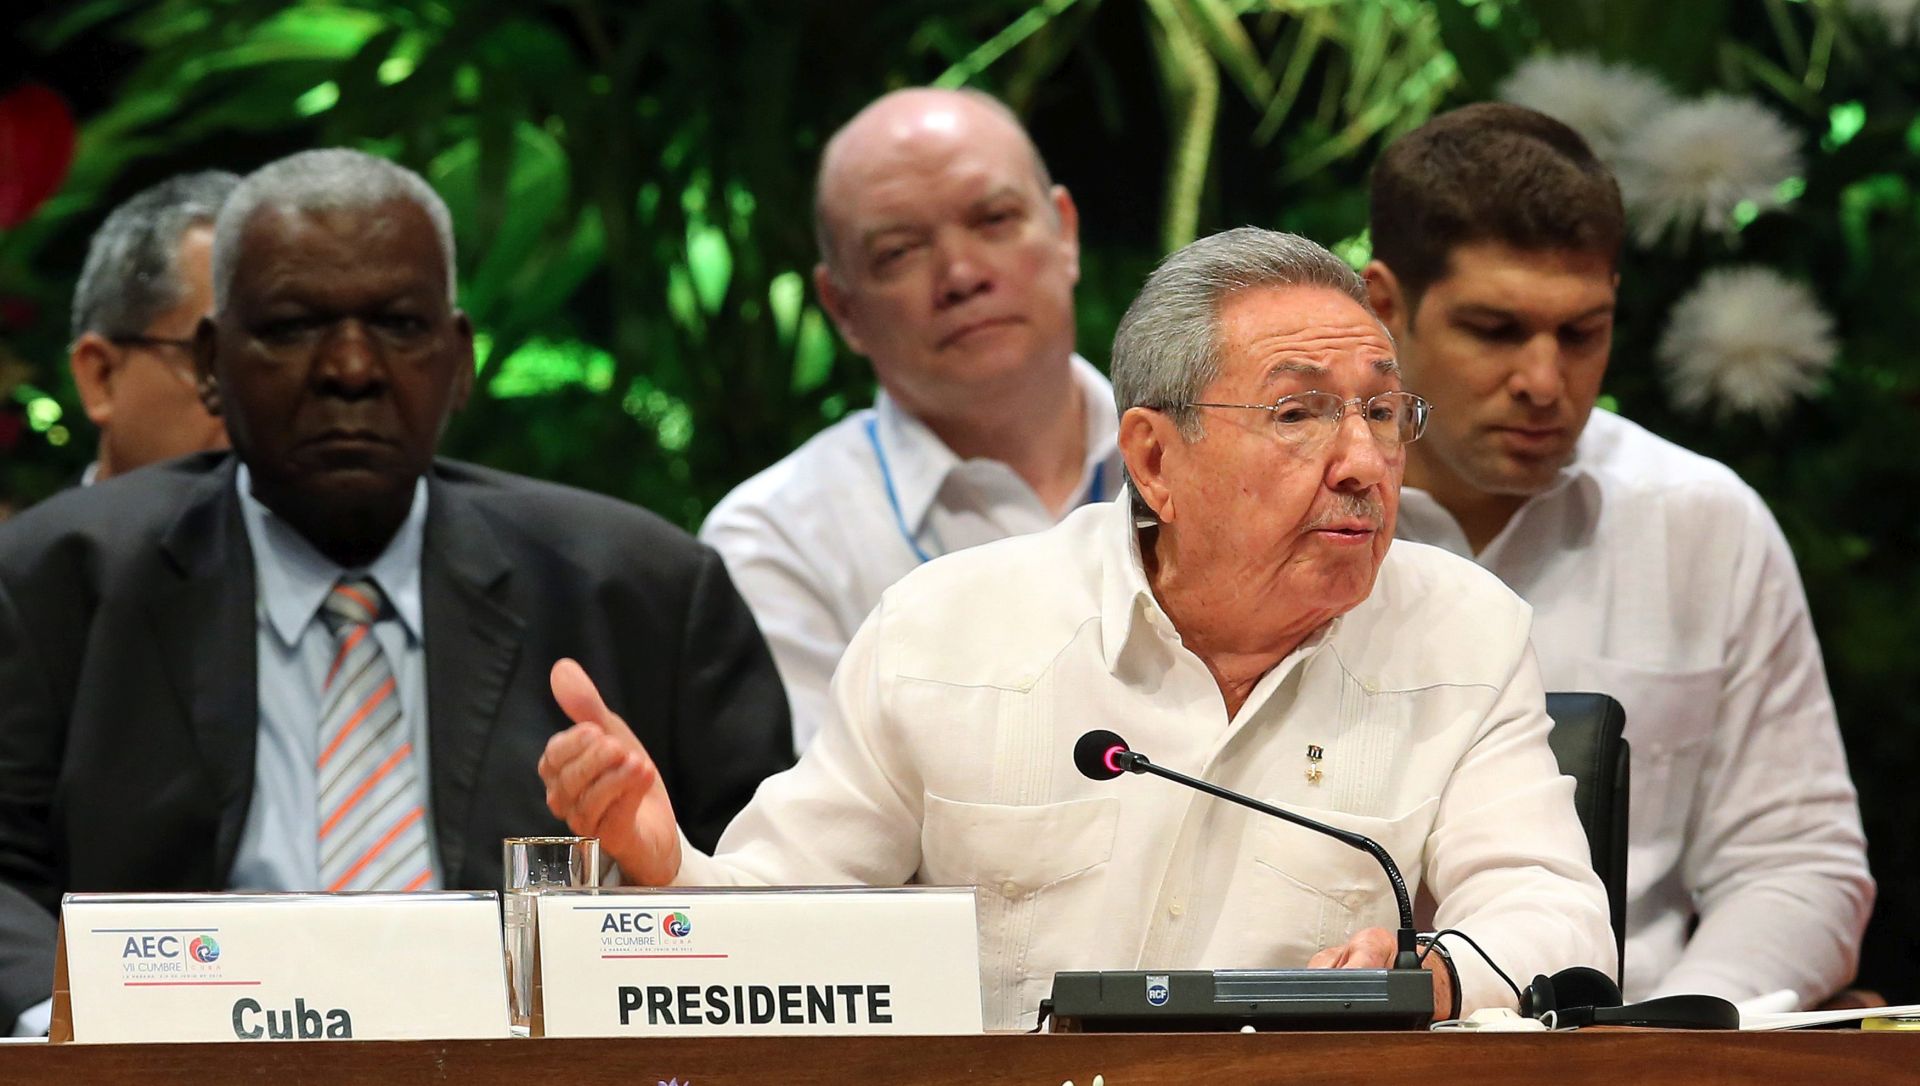 epa05346032 Cuban President Raul Castro (C) speaks during the opening of the segment of heads of state of the VII Summit of Association of Caribbean States (ACS) in Havana, Cuba, 04 June 2016. The presidents of the Caribbean nations on 04 June at the 7th ACS Summit to to strengthen the unity and consensus to the challenges of the future and the crisis that some countries in the region currently live.  EPA/Alejandro Ernesto